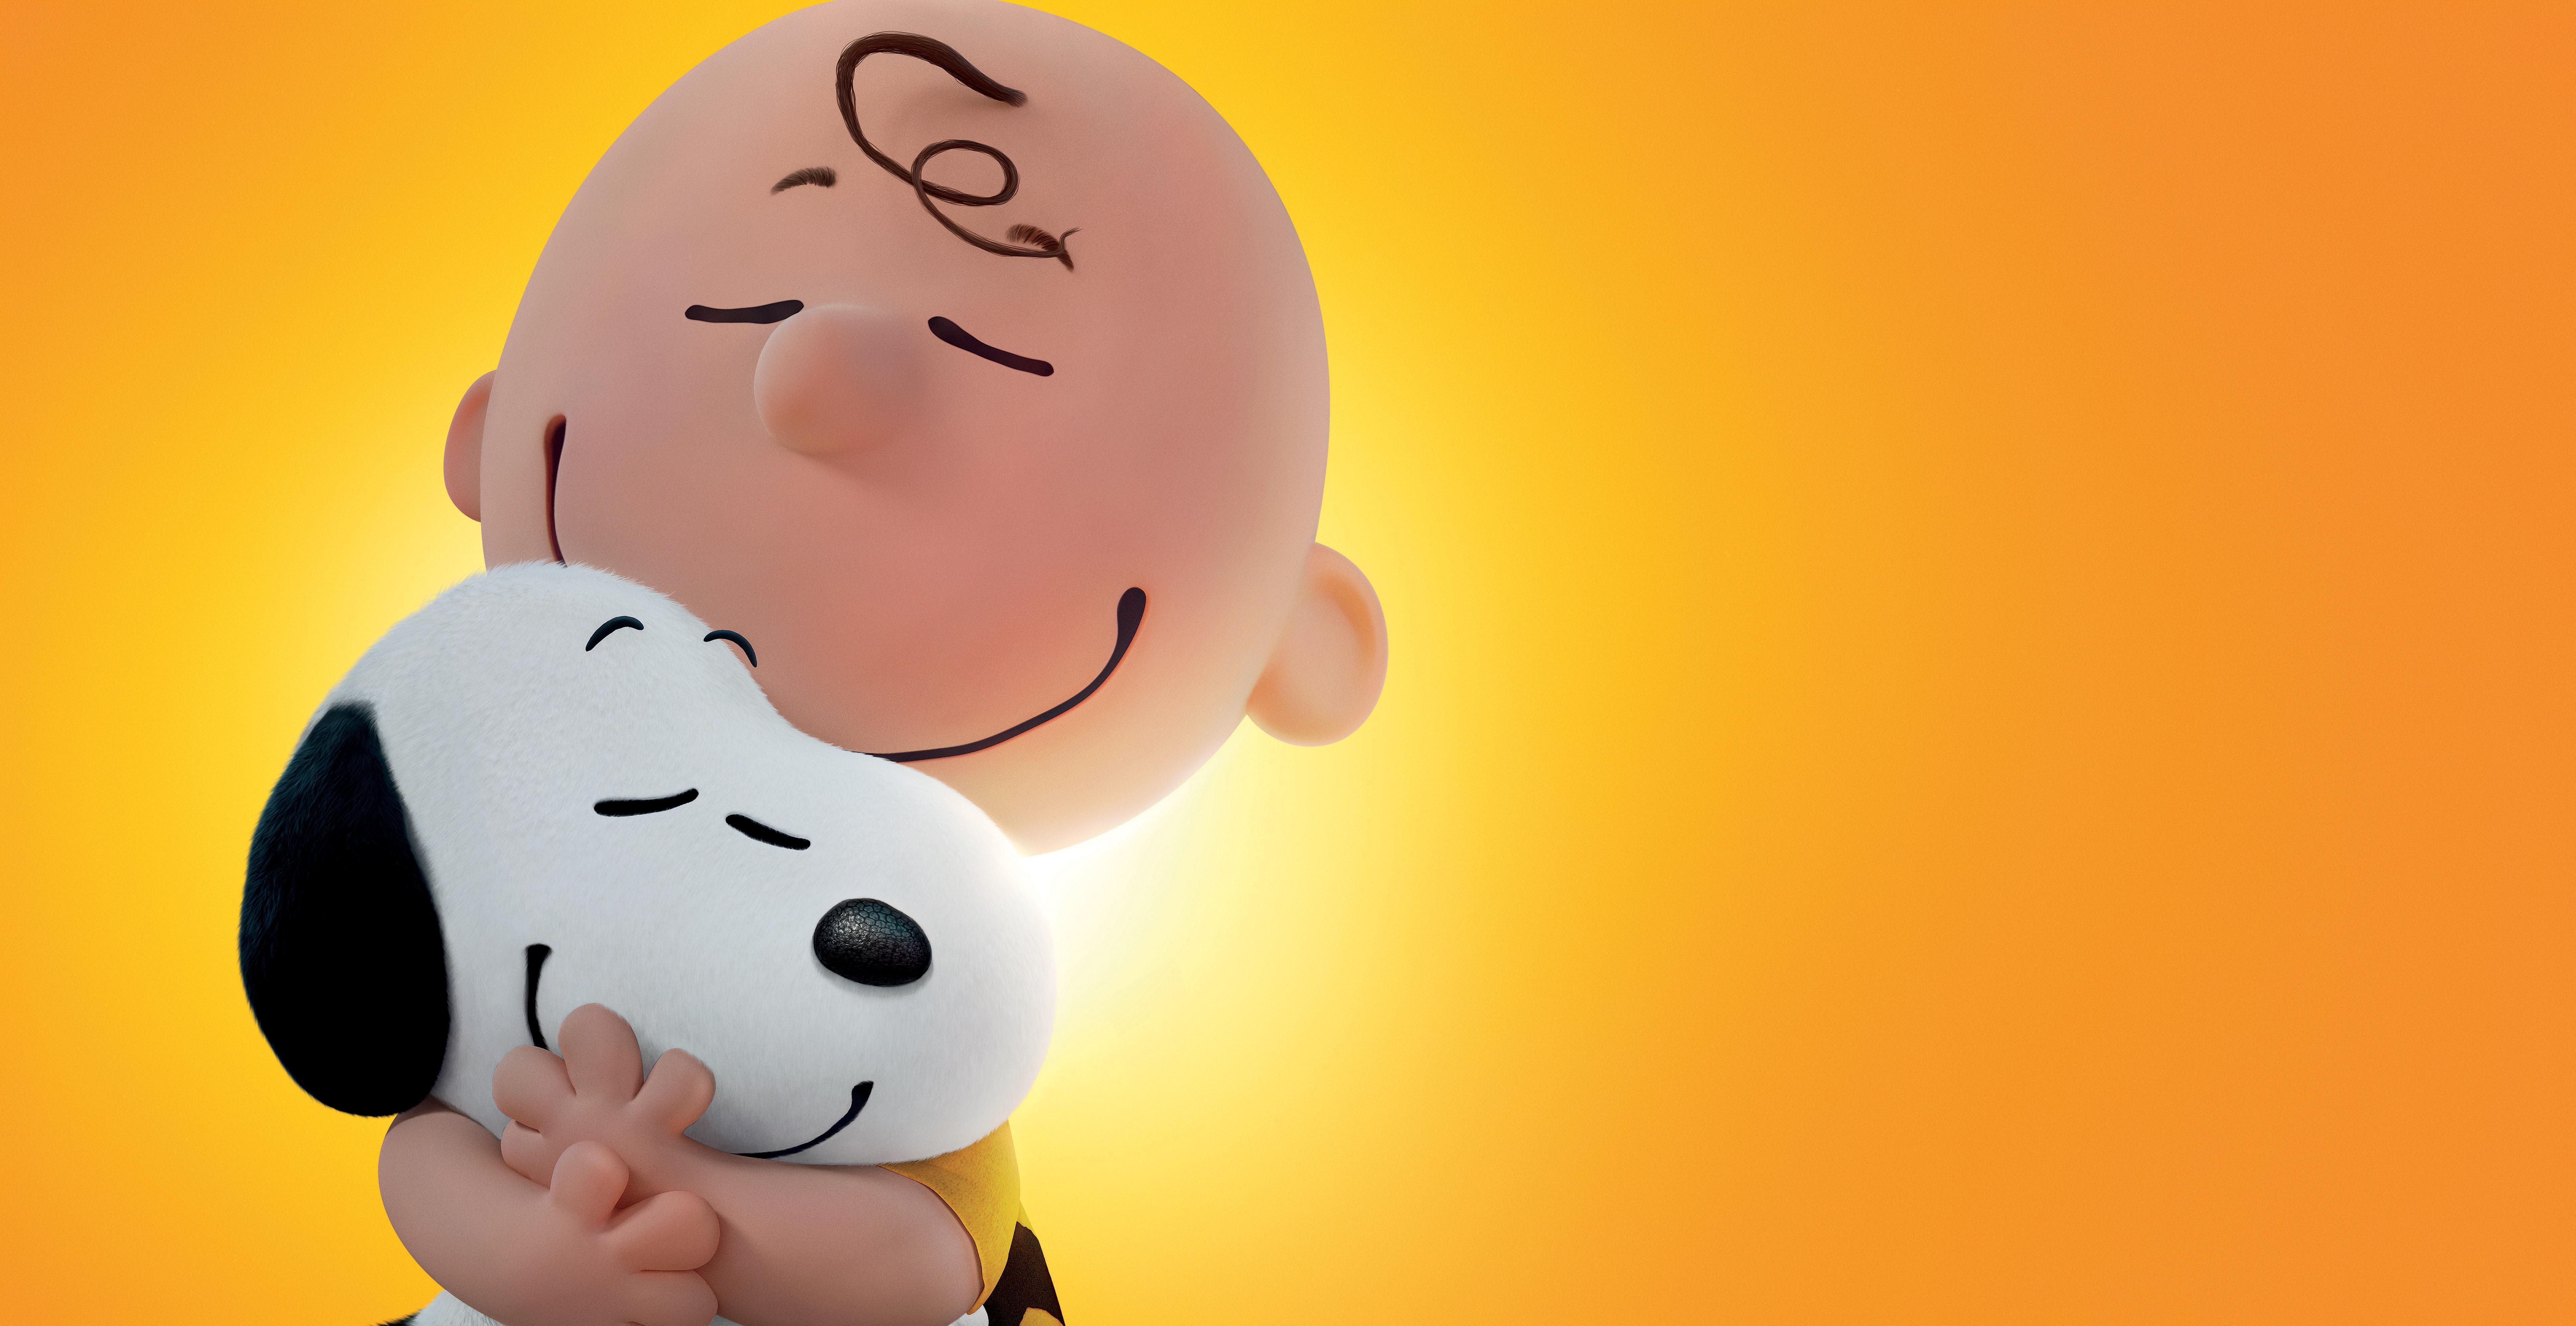 HD wallpaper, Snoopy, The Peanuts Movie, Animation, Charlie Brown